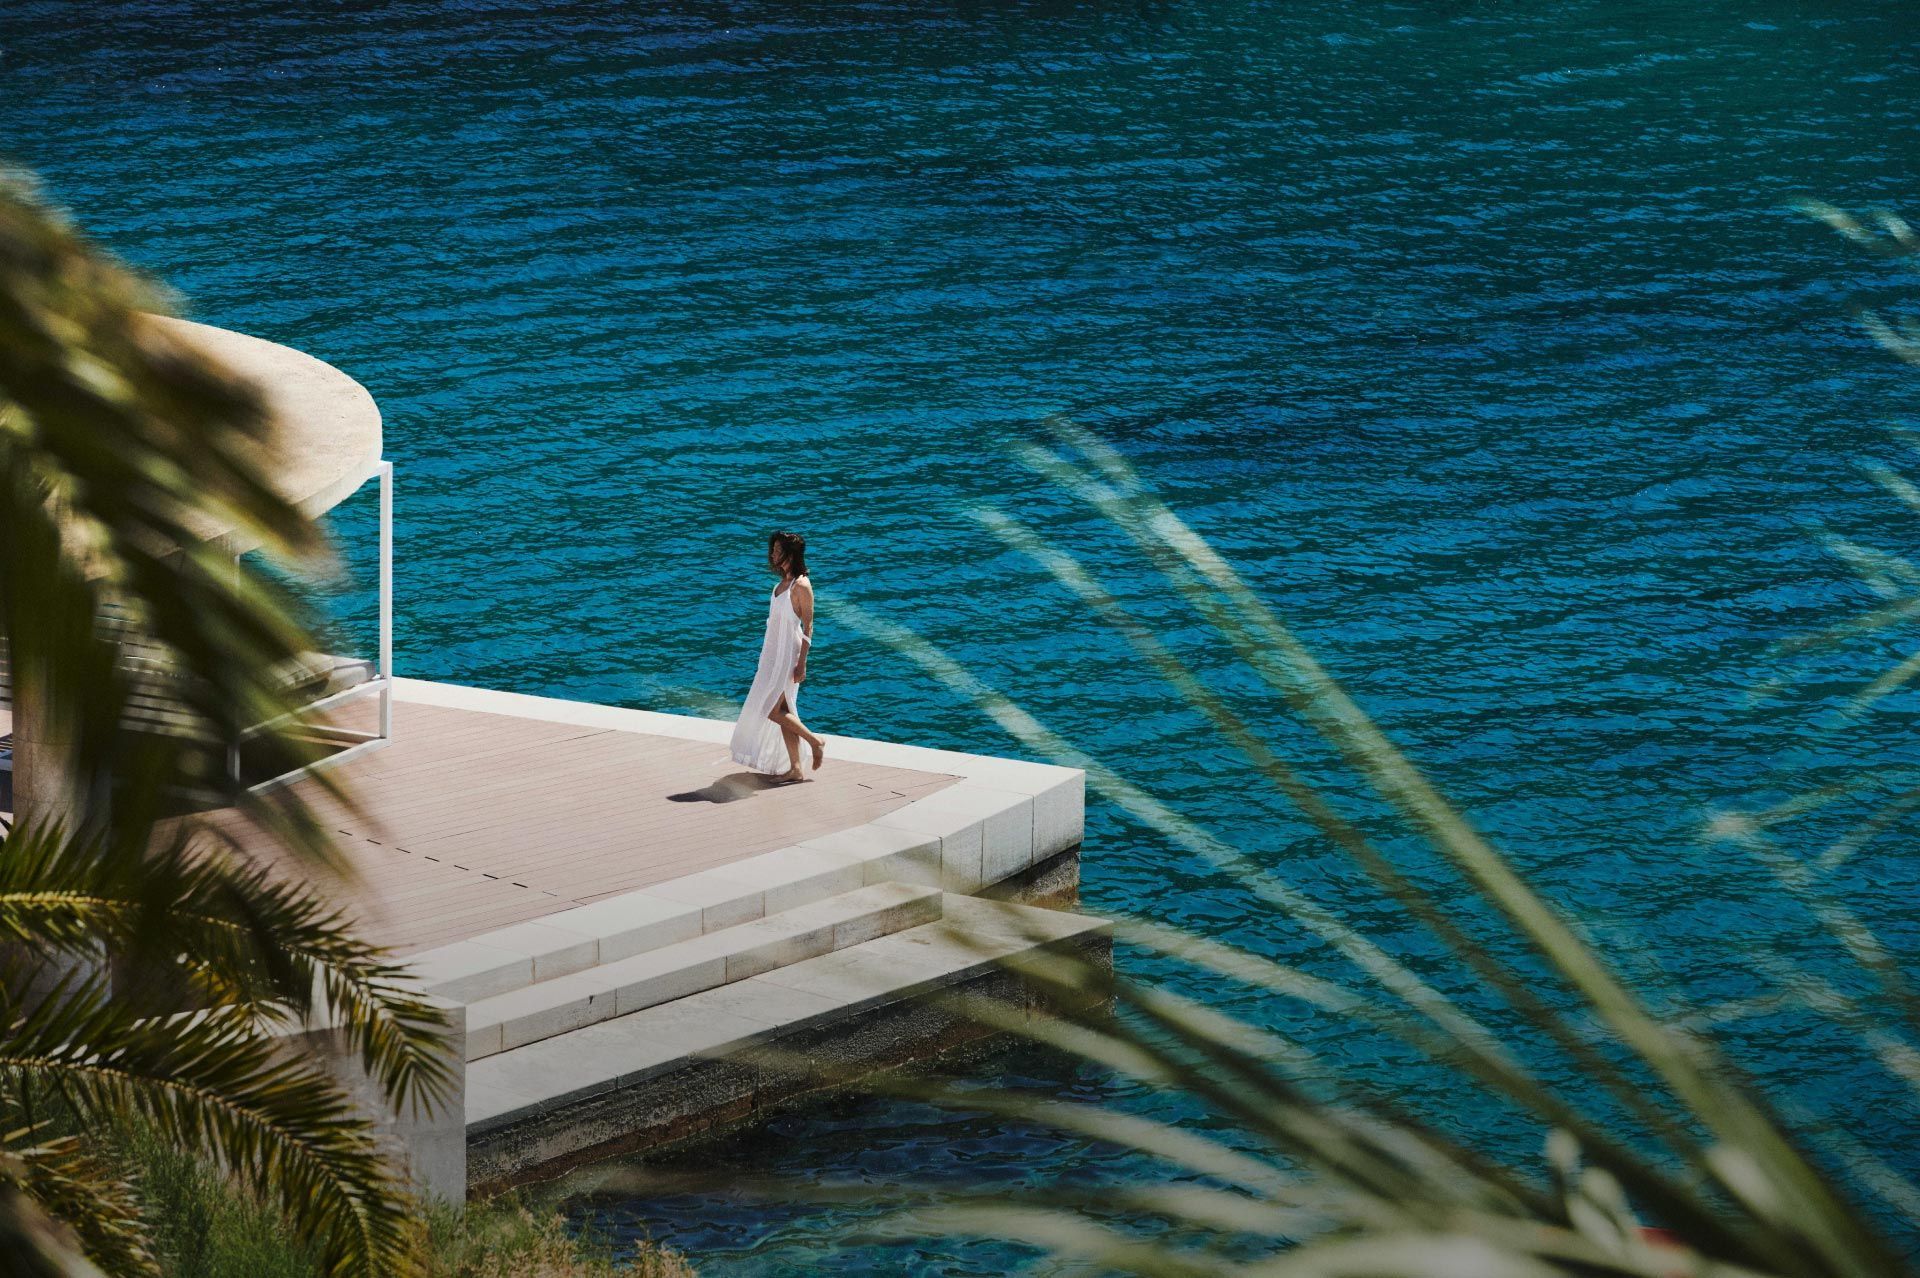 A woman in a white dress walking on a seaside deck, with the deep blue sea in the background.